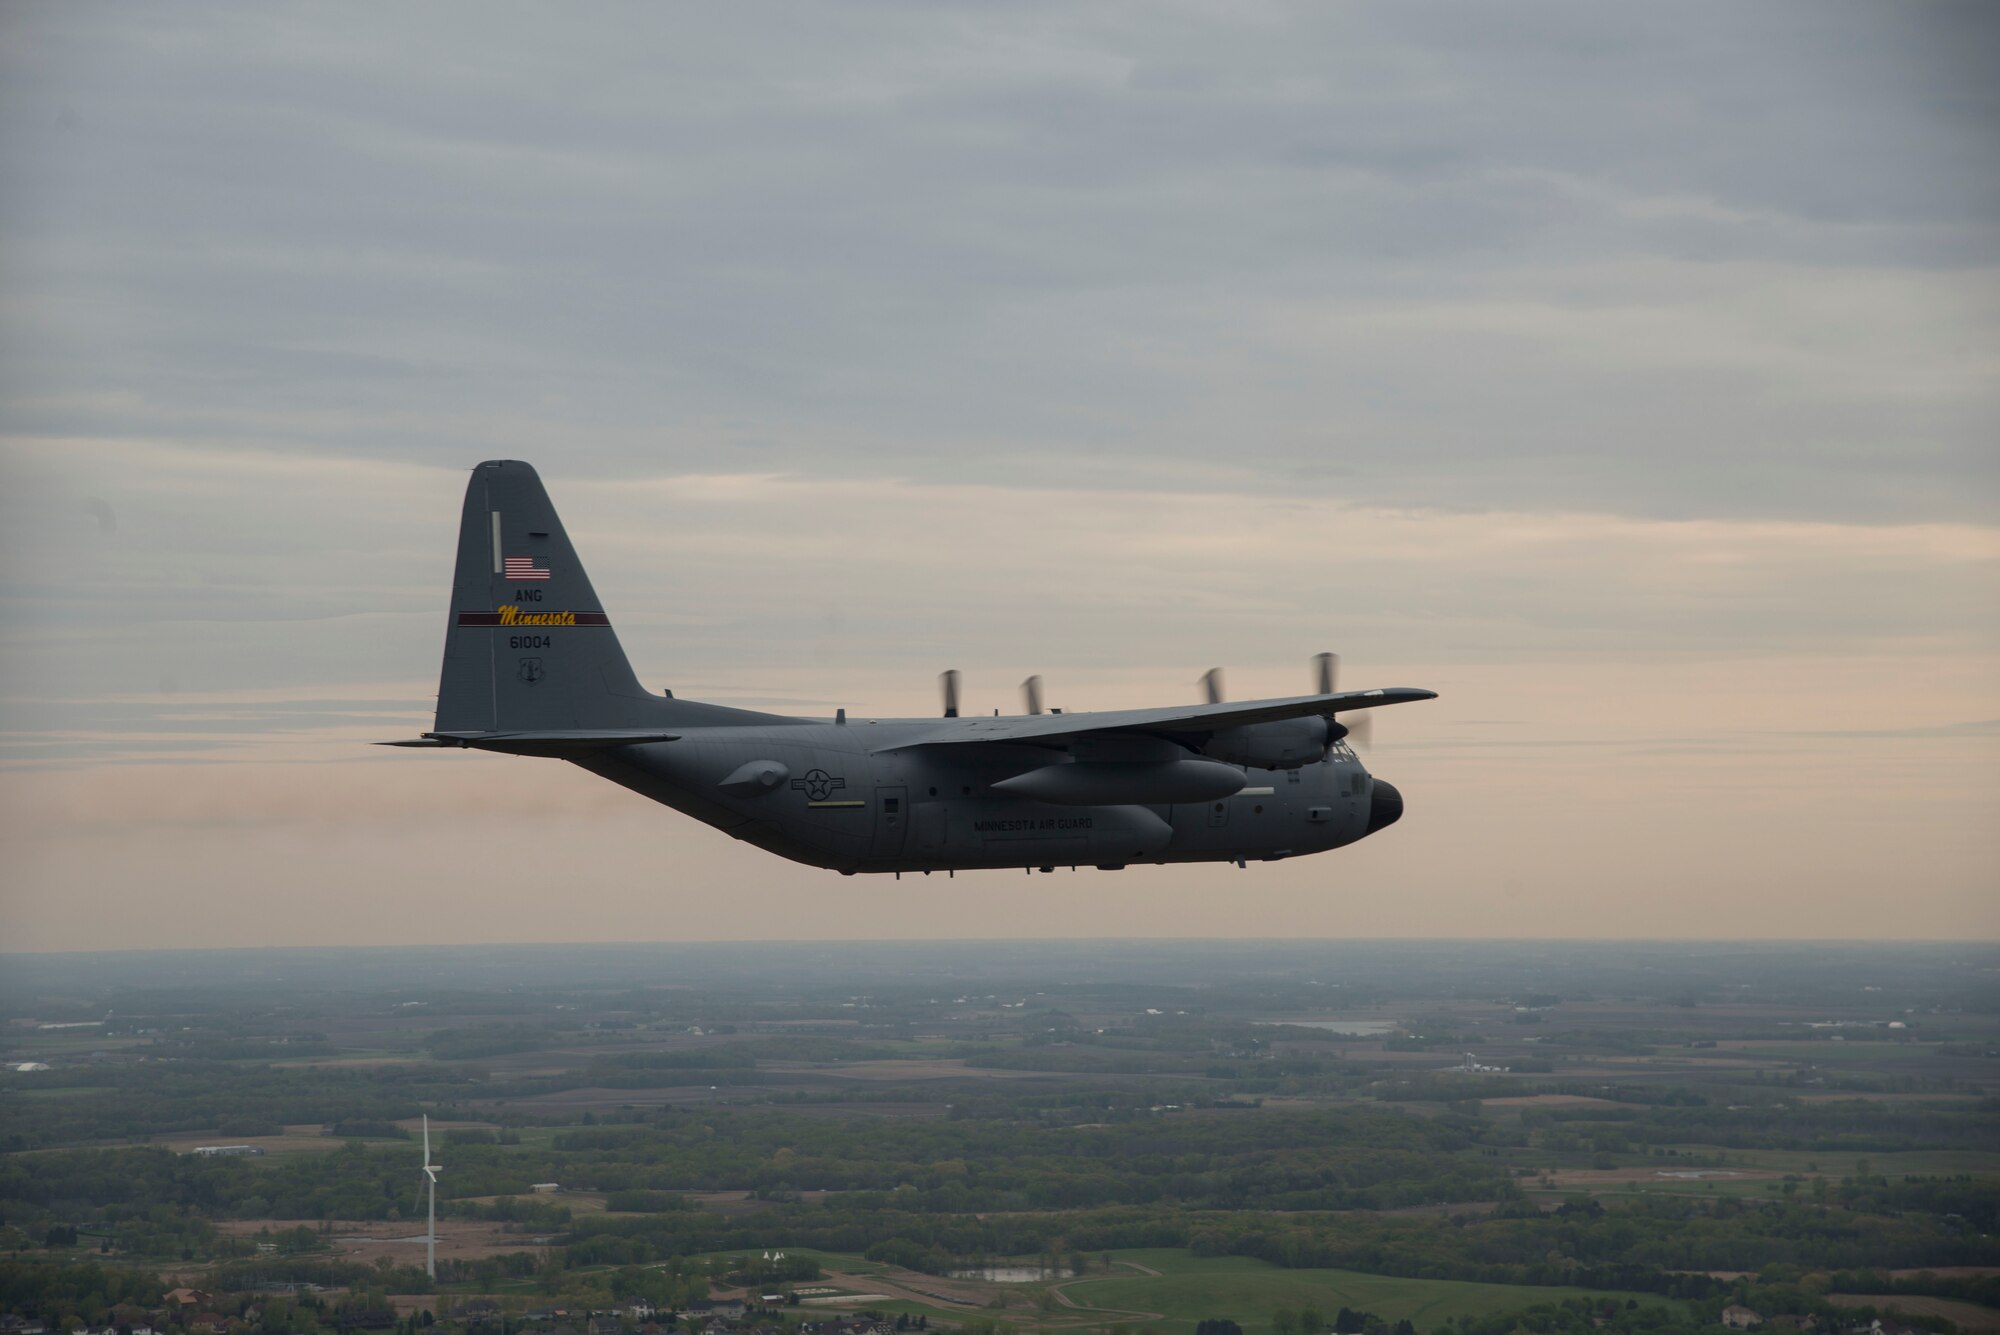 A U.S. Air Force C-130 from the 133rd Airlift Wing flies with a C-130 from the 934th Airlift Wing during a flyover in Minnesota, May 13, 2020. The 934th Airlift Wing along with the Minnesota National Guard’s 133rd Airlift Wing flew statewide flyovers in recognition of those on the frontlines of the COVID-19 pandemic response as part of Operation American Resolve. (U.S. Air Force photo by Chris Farley)